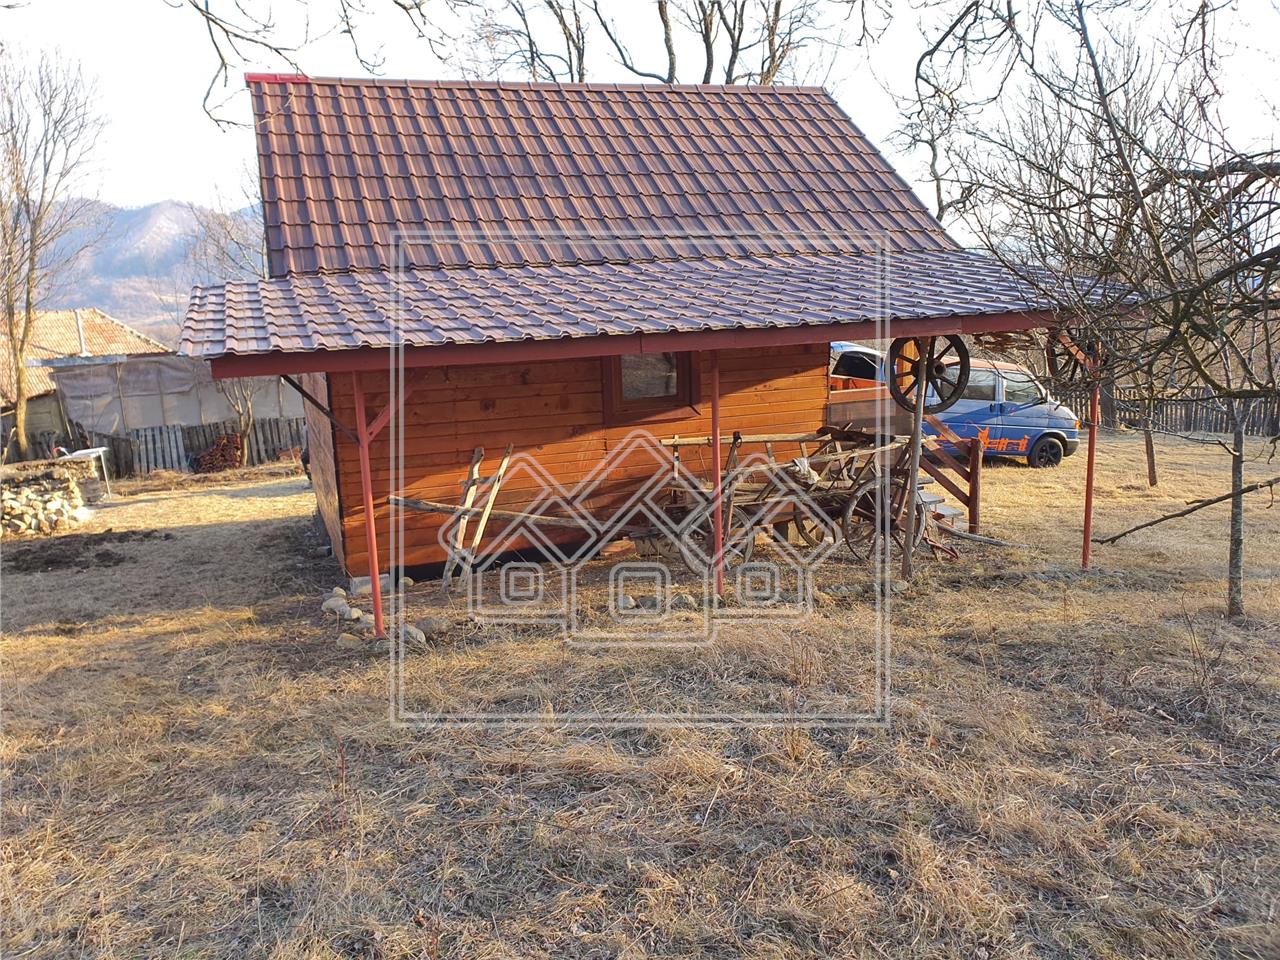 Chalet for sale, 60 km from Sibiu with orchard of 3200 sqm